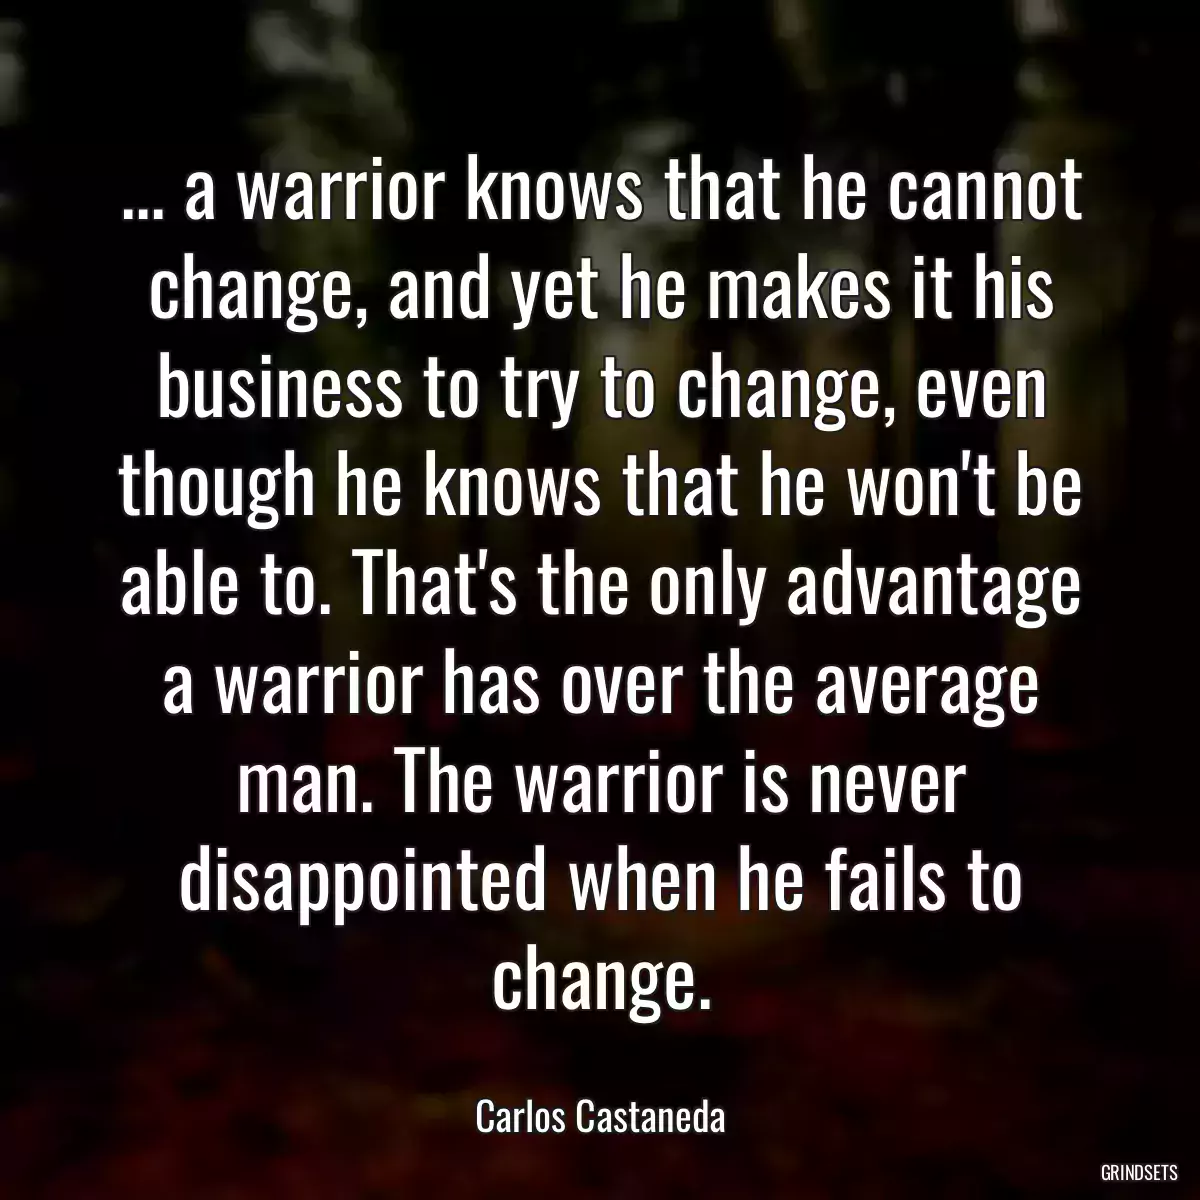 ... a warrior knows that he cannot change, and yet he makes it his business to try to change, even though he knows that he won\'t be able to. That\'s the only advantage a warrior has over the average man. The warrior is never disappointed when he fails to change.